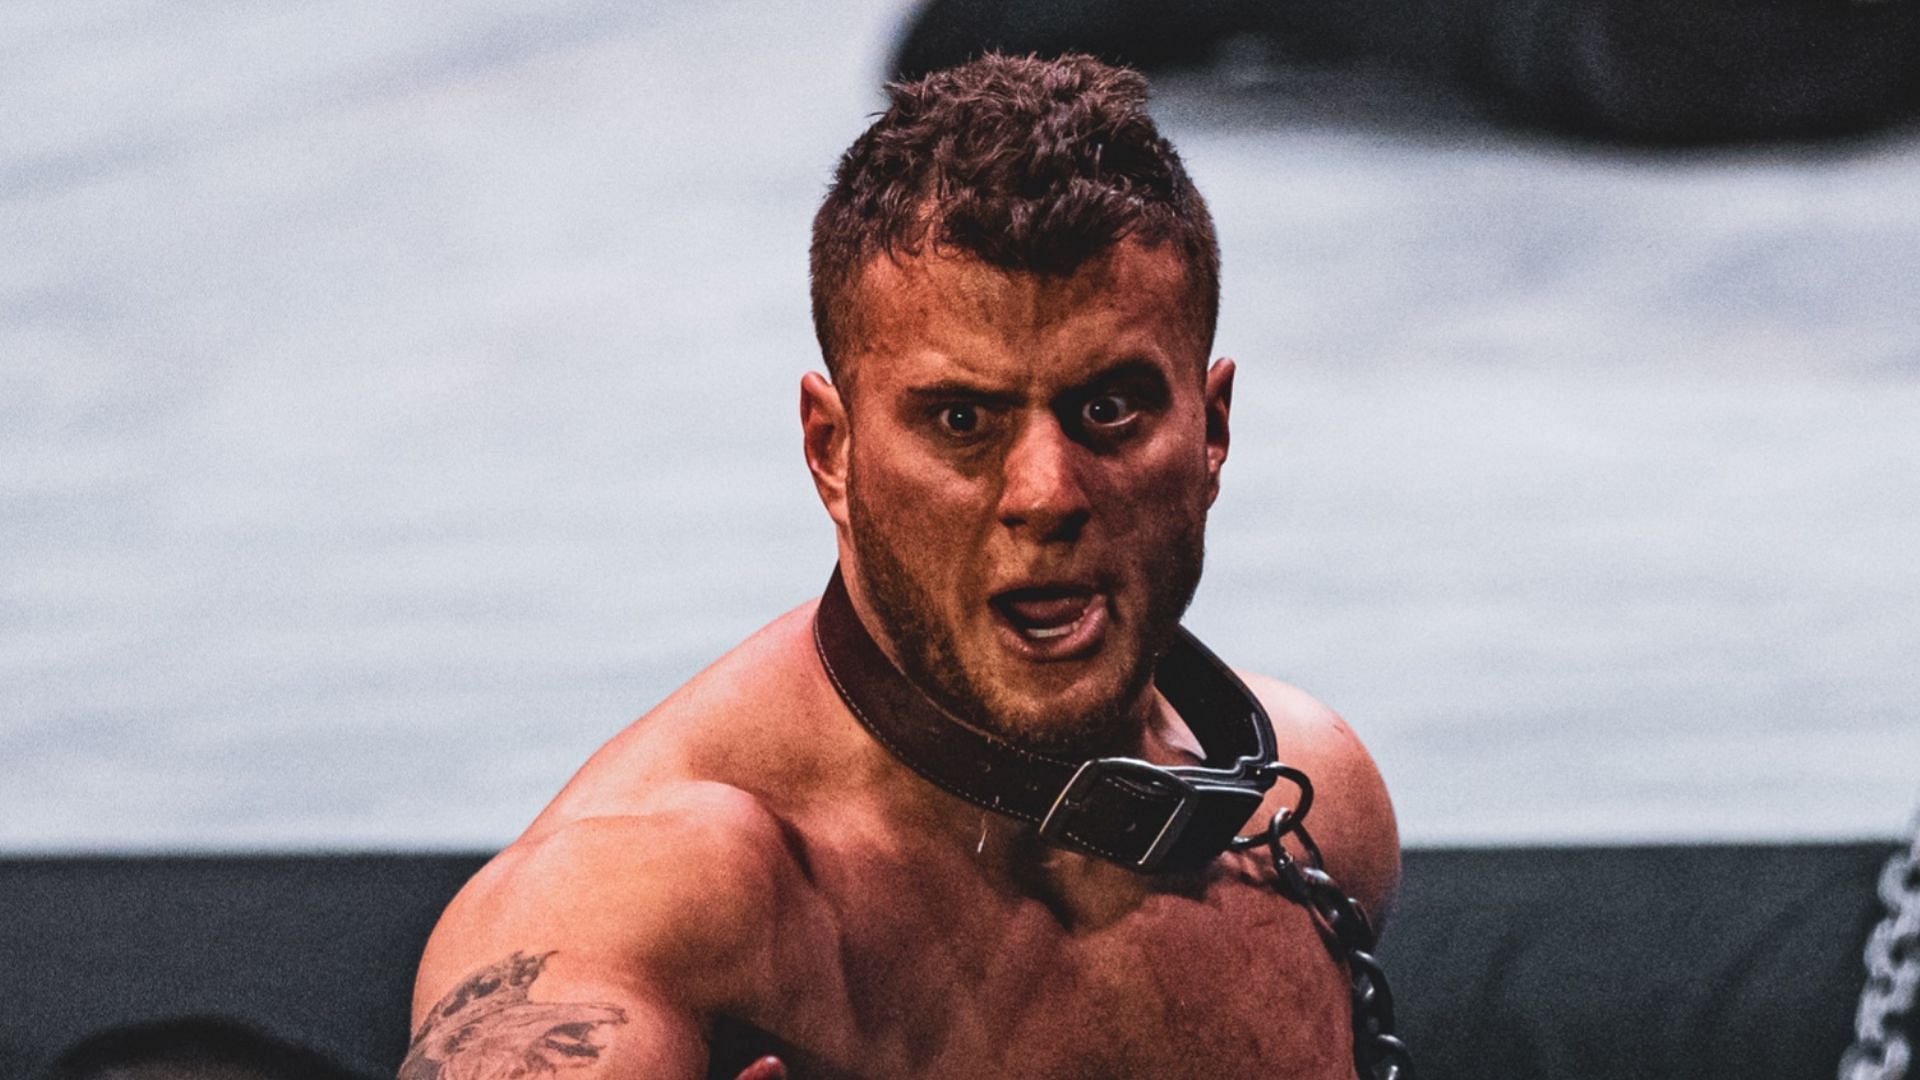 MJF during his match at AEW Revolution 2022